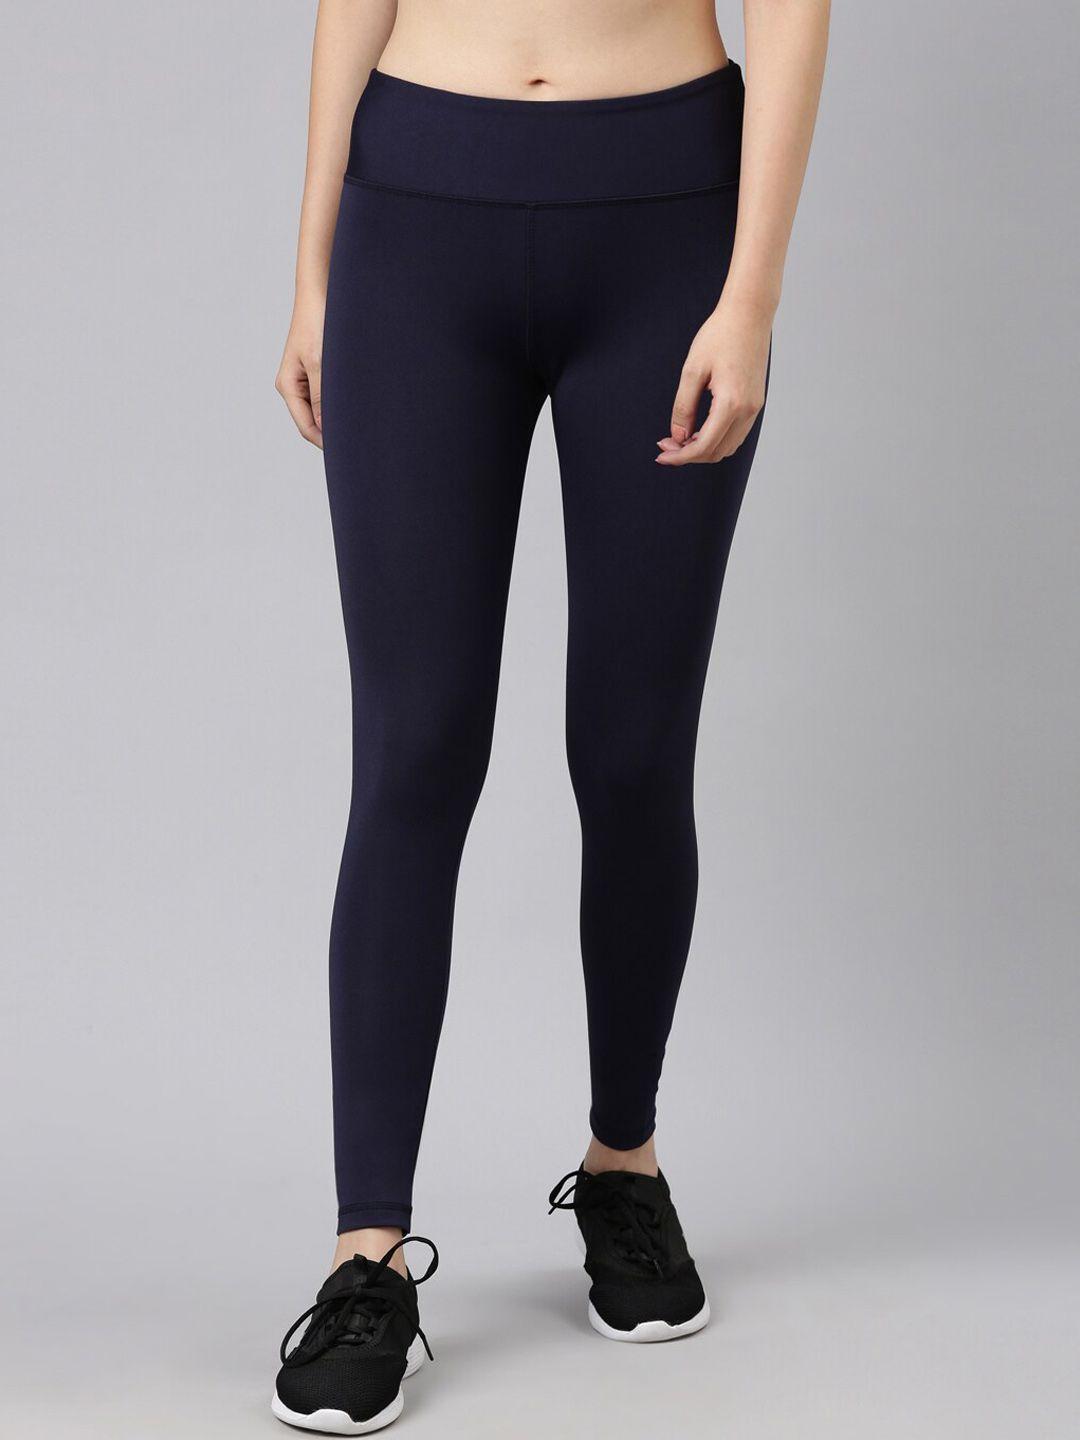 kryptic women navy blue solid slim-fit ankle length training tights